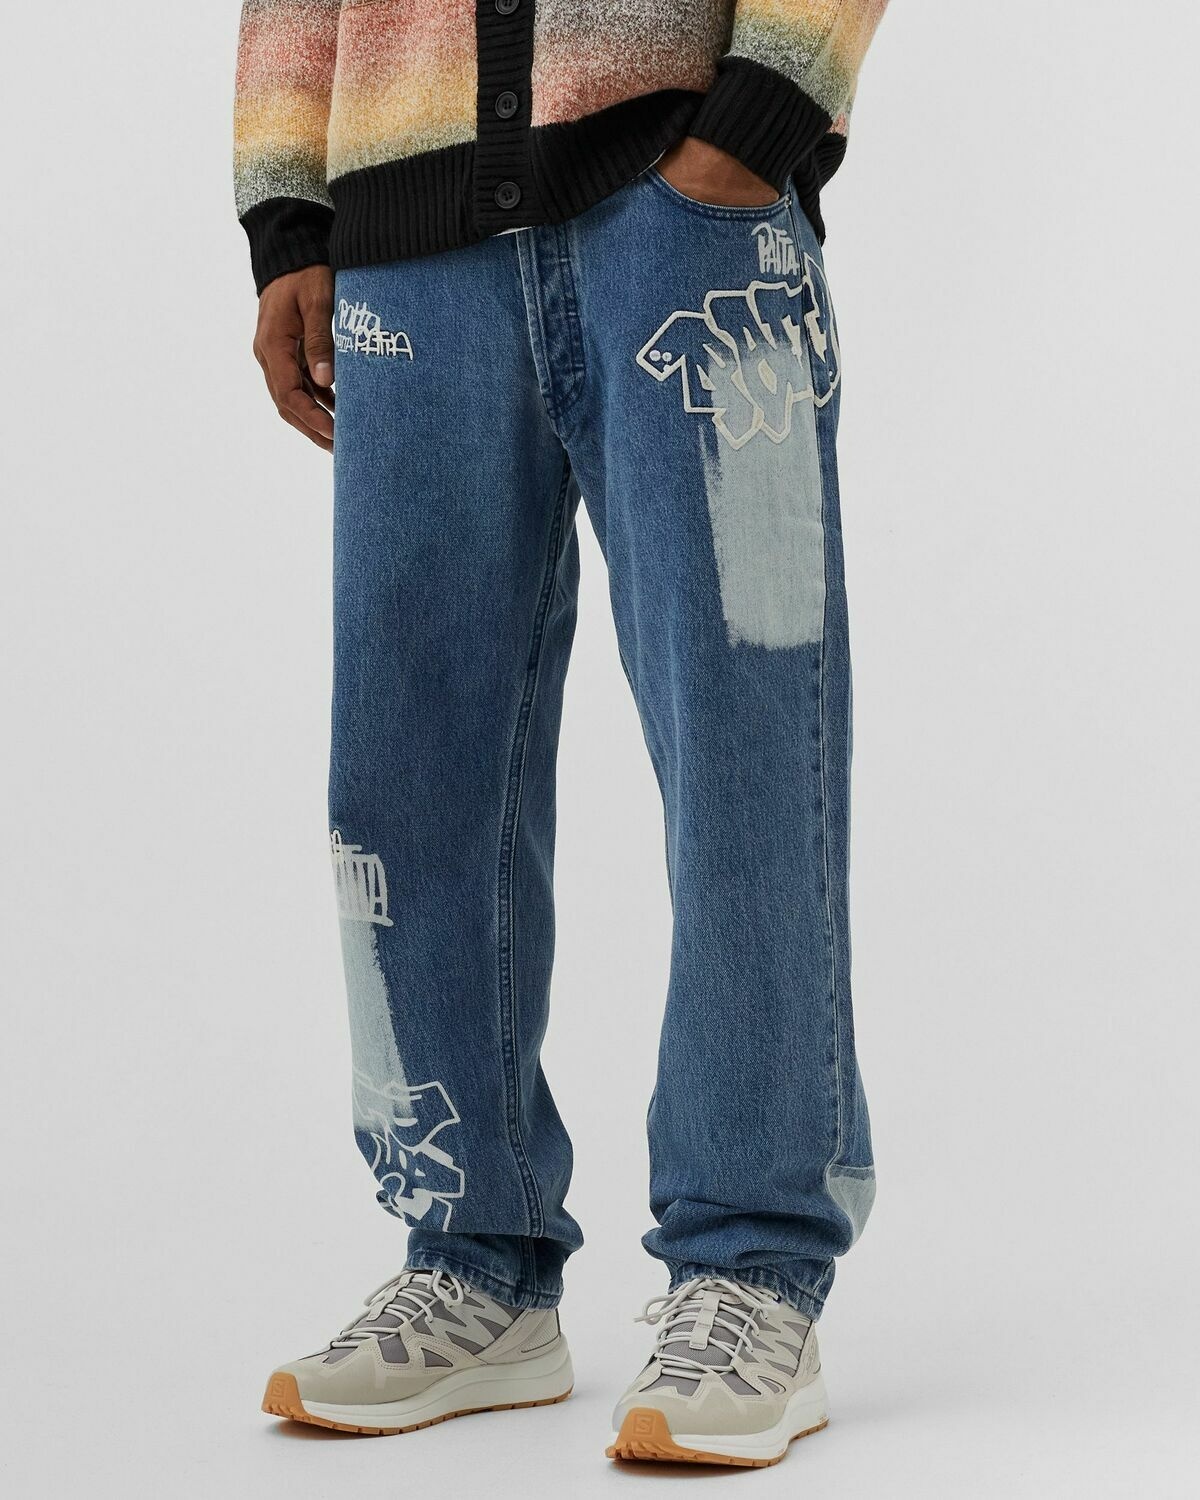 Vintage Ripped Denim Jeans For Men Plus Size 42 44, Baggy Cargo Pants,  Fashionable Causal Jeans Trousers For Men With Big Size Bottoms J230728  From Sihuai10, $17.31 | DHgate.Com